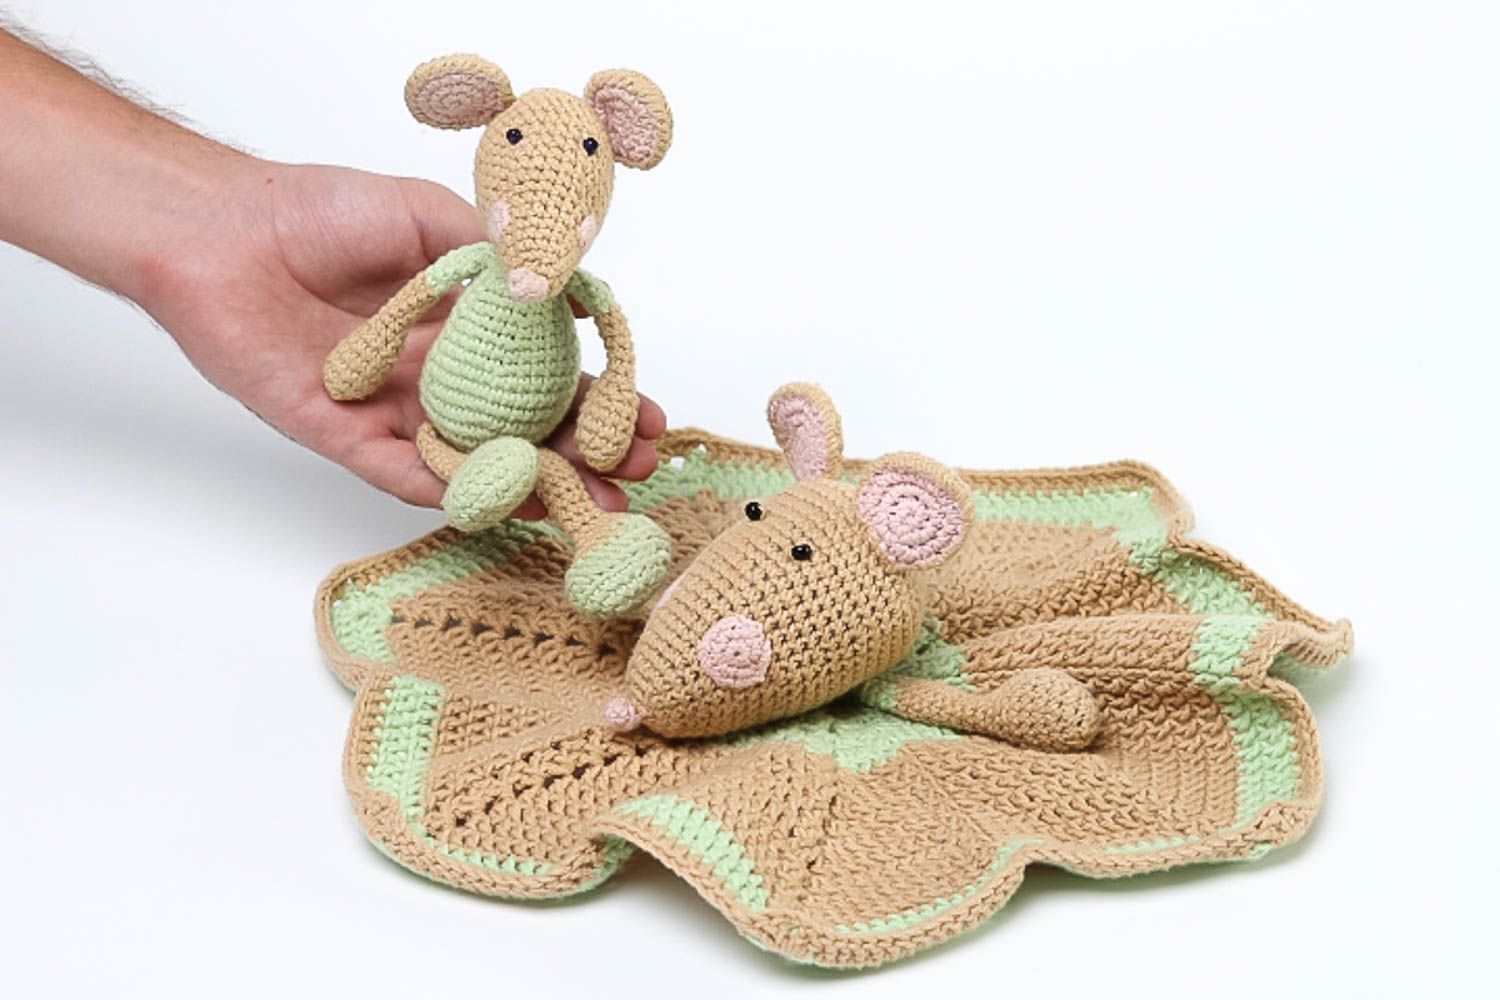 Handmade crocheted soft toy for babies nursery decor ideas soft toy for children photo 5